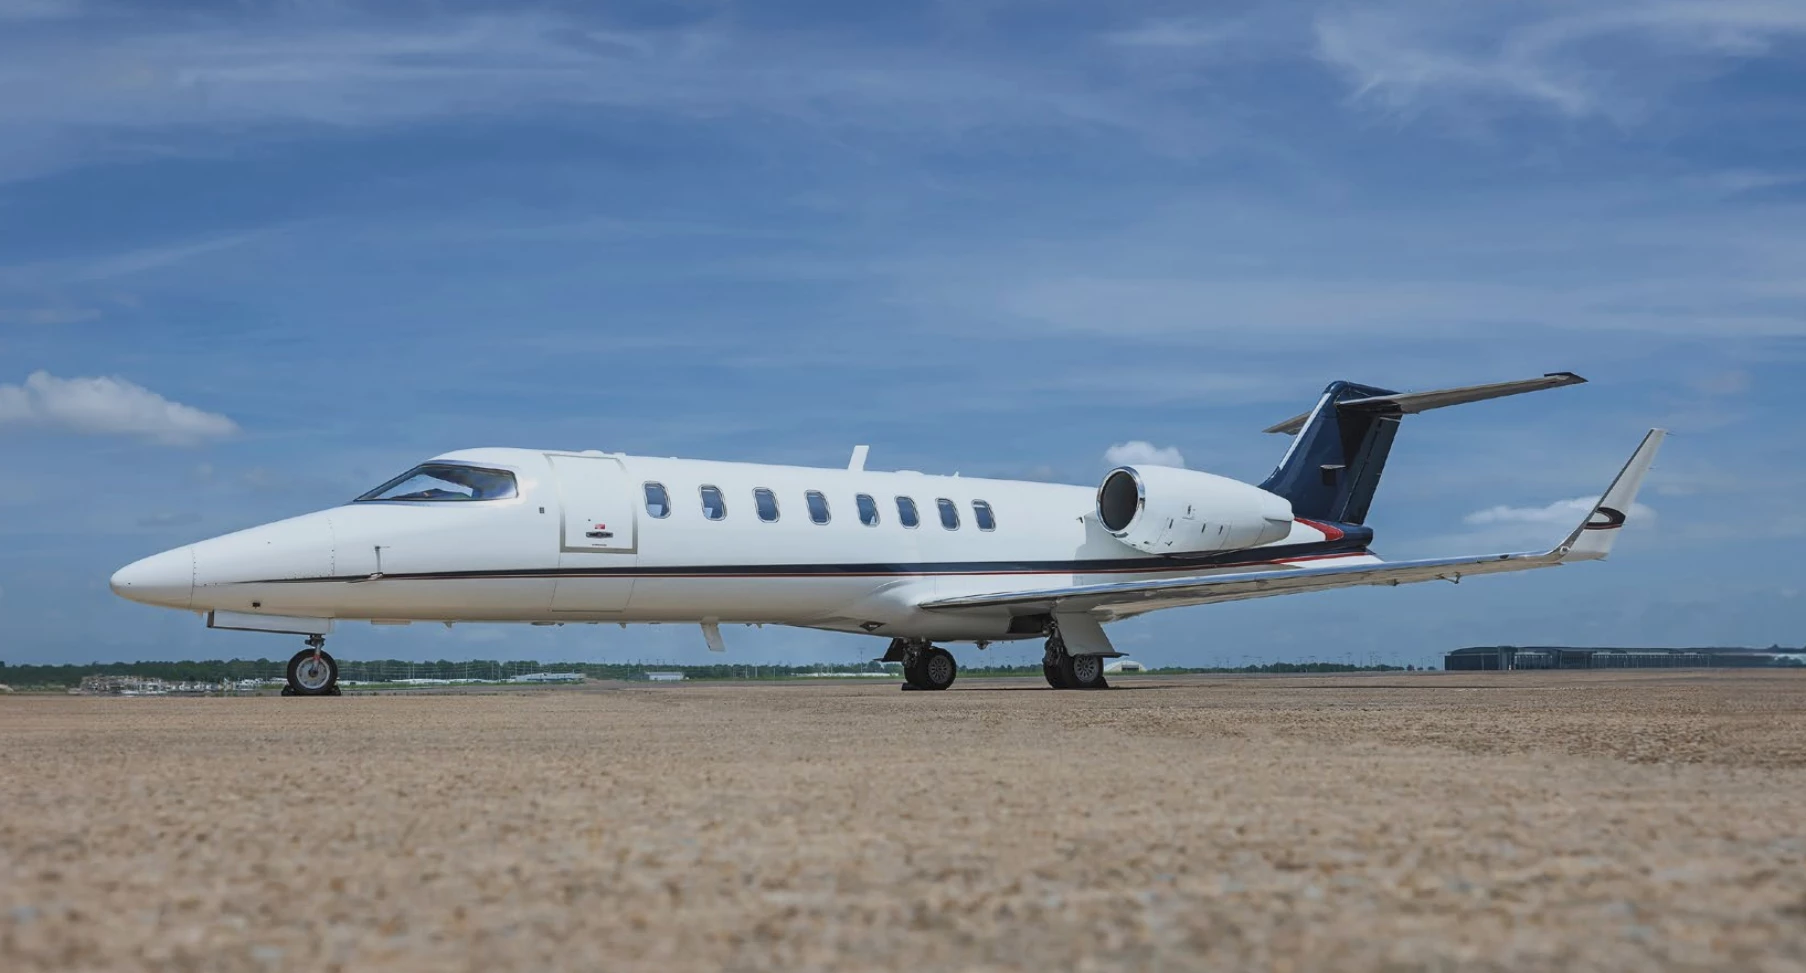 Bombardier Learjet 45XR 2009 Aircraft Image Main